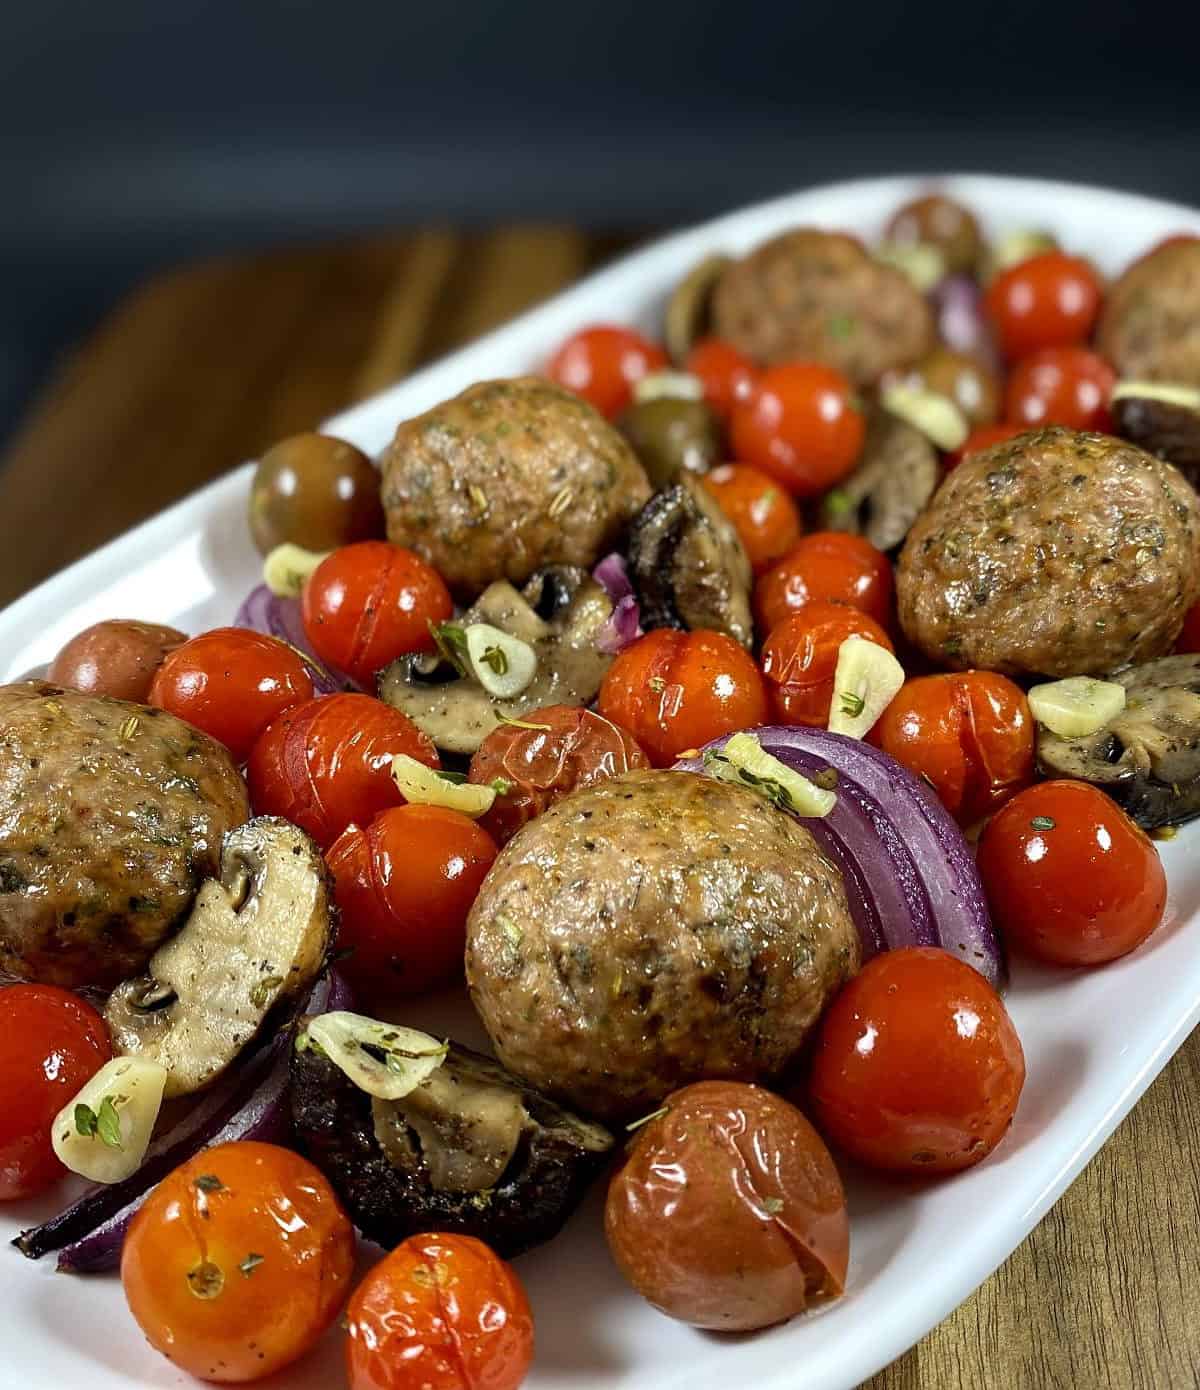  Who says meatballs are boring? These Cherry Tomato Meatballs will make your taste buds sizzle with excitement.